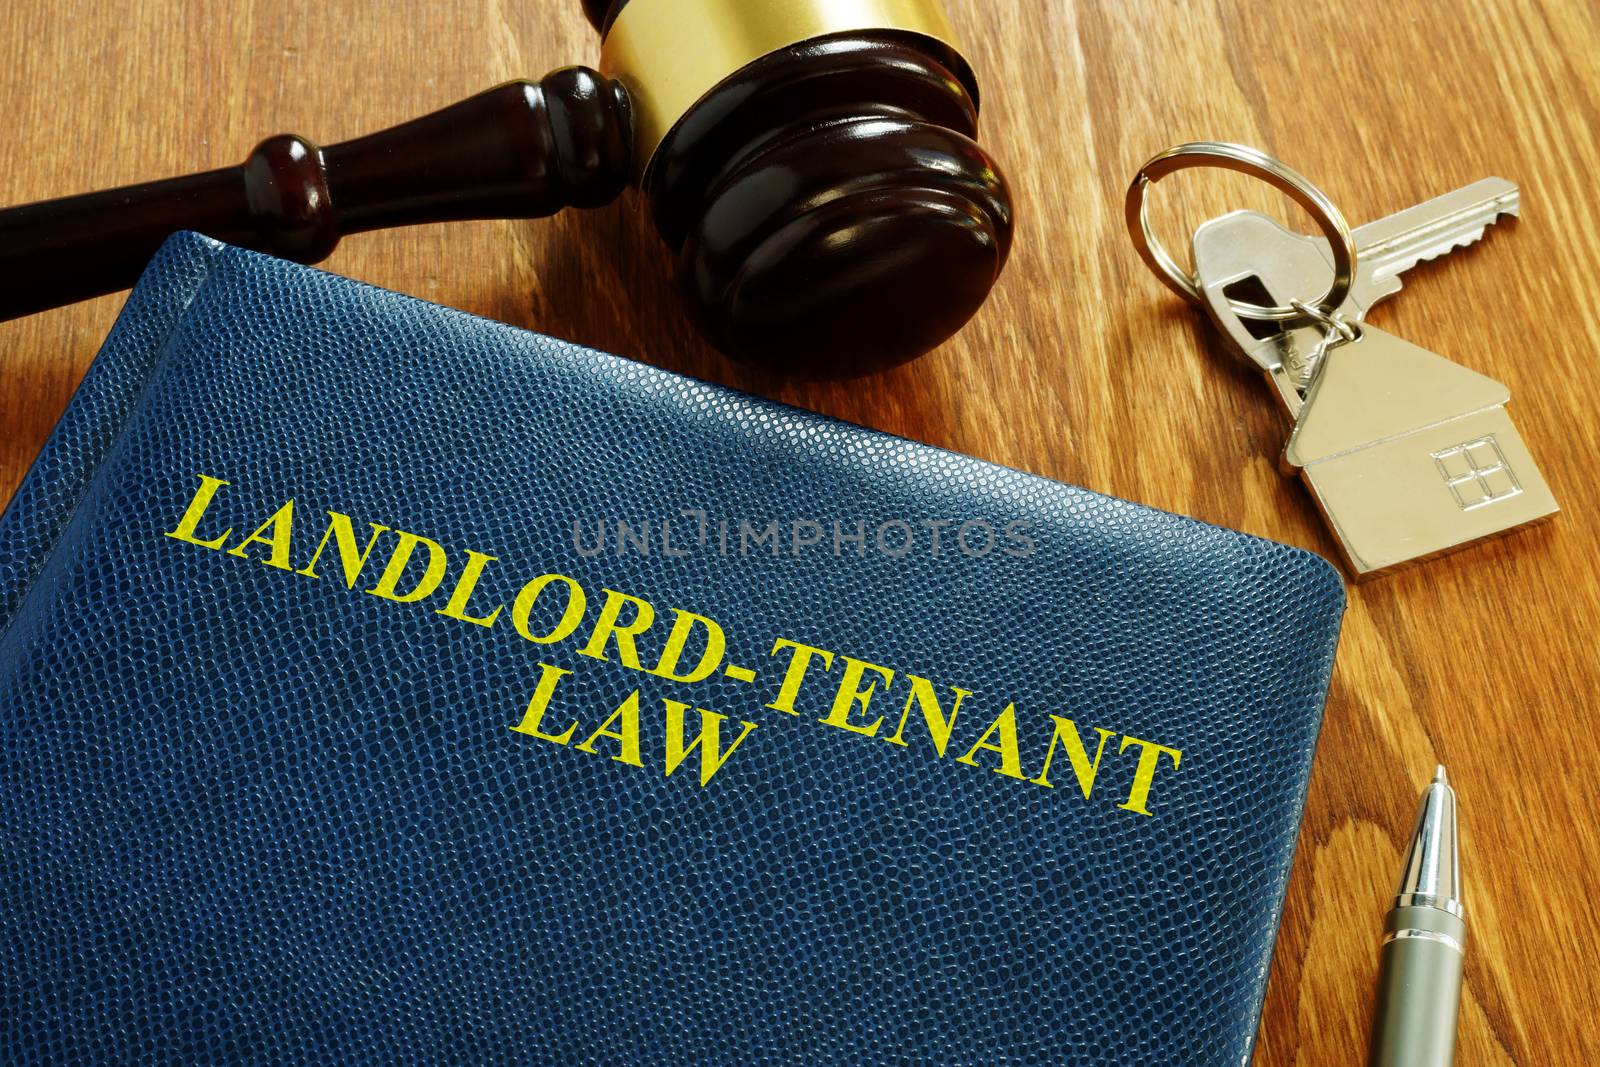 Landlord Tenant Law book and key from home. by designer491